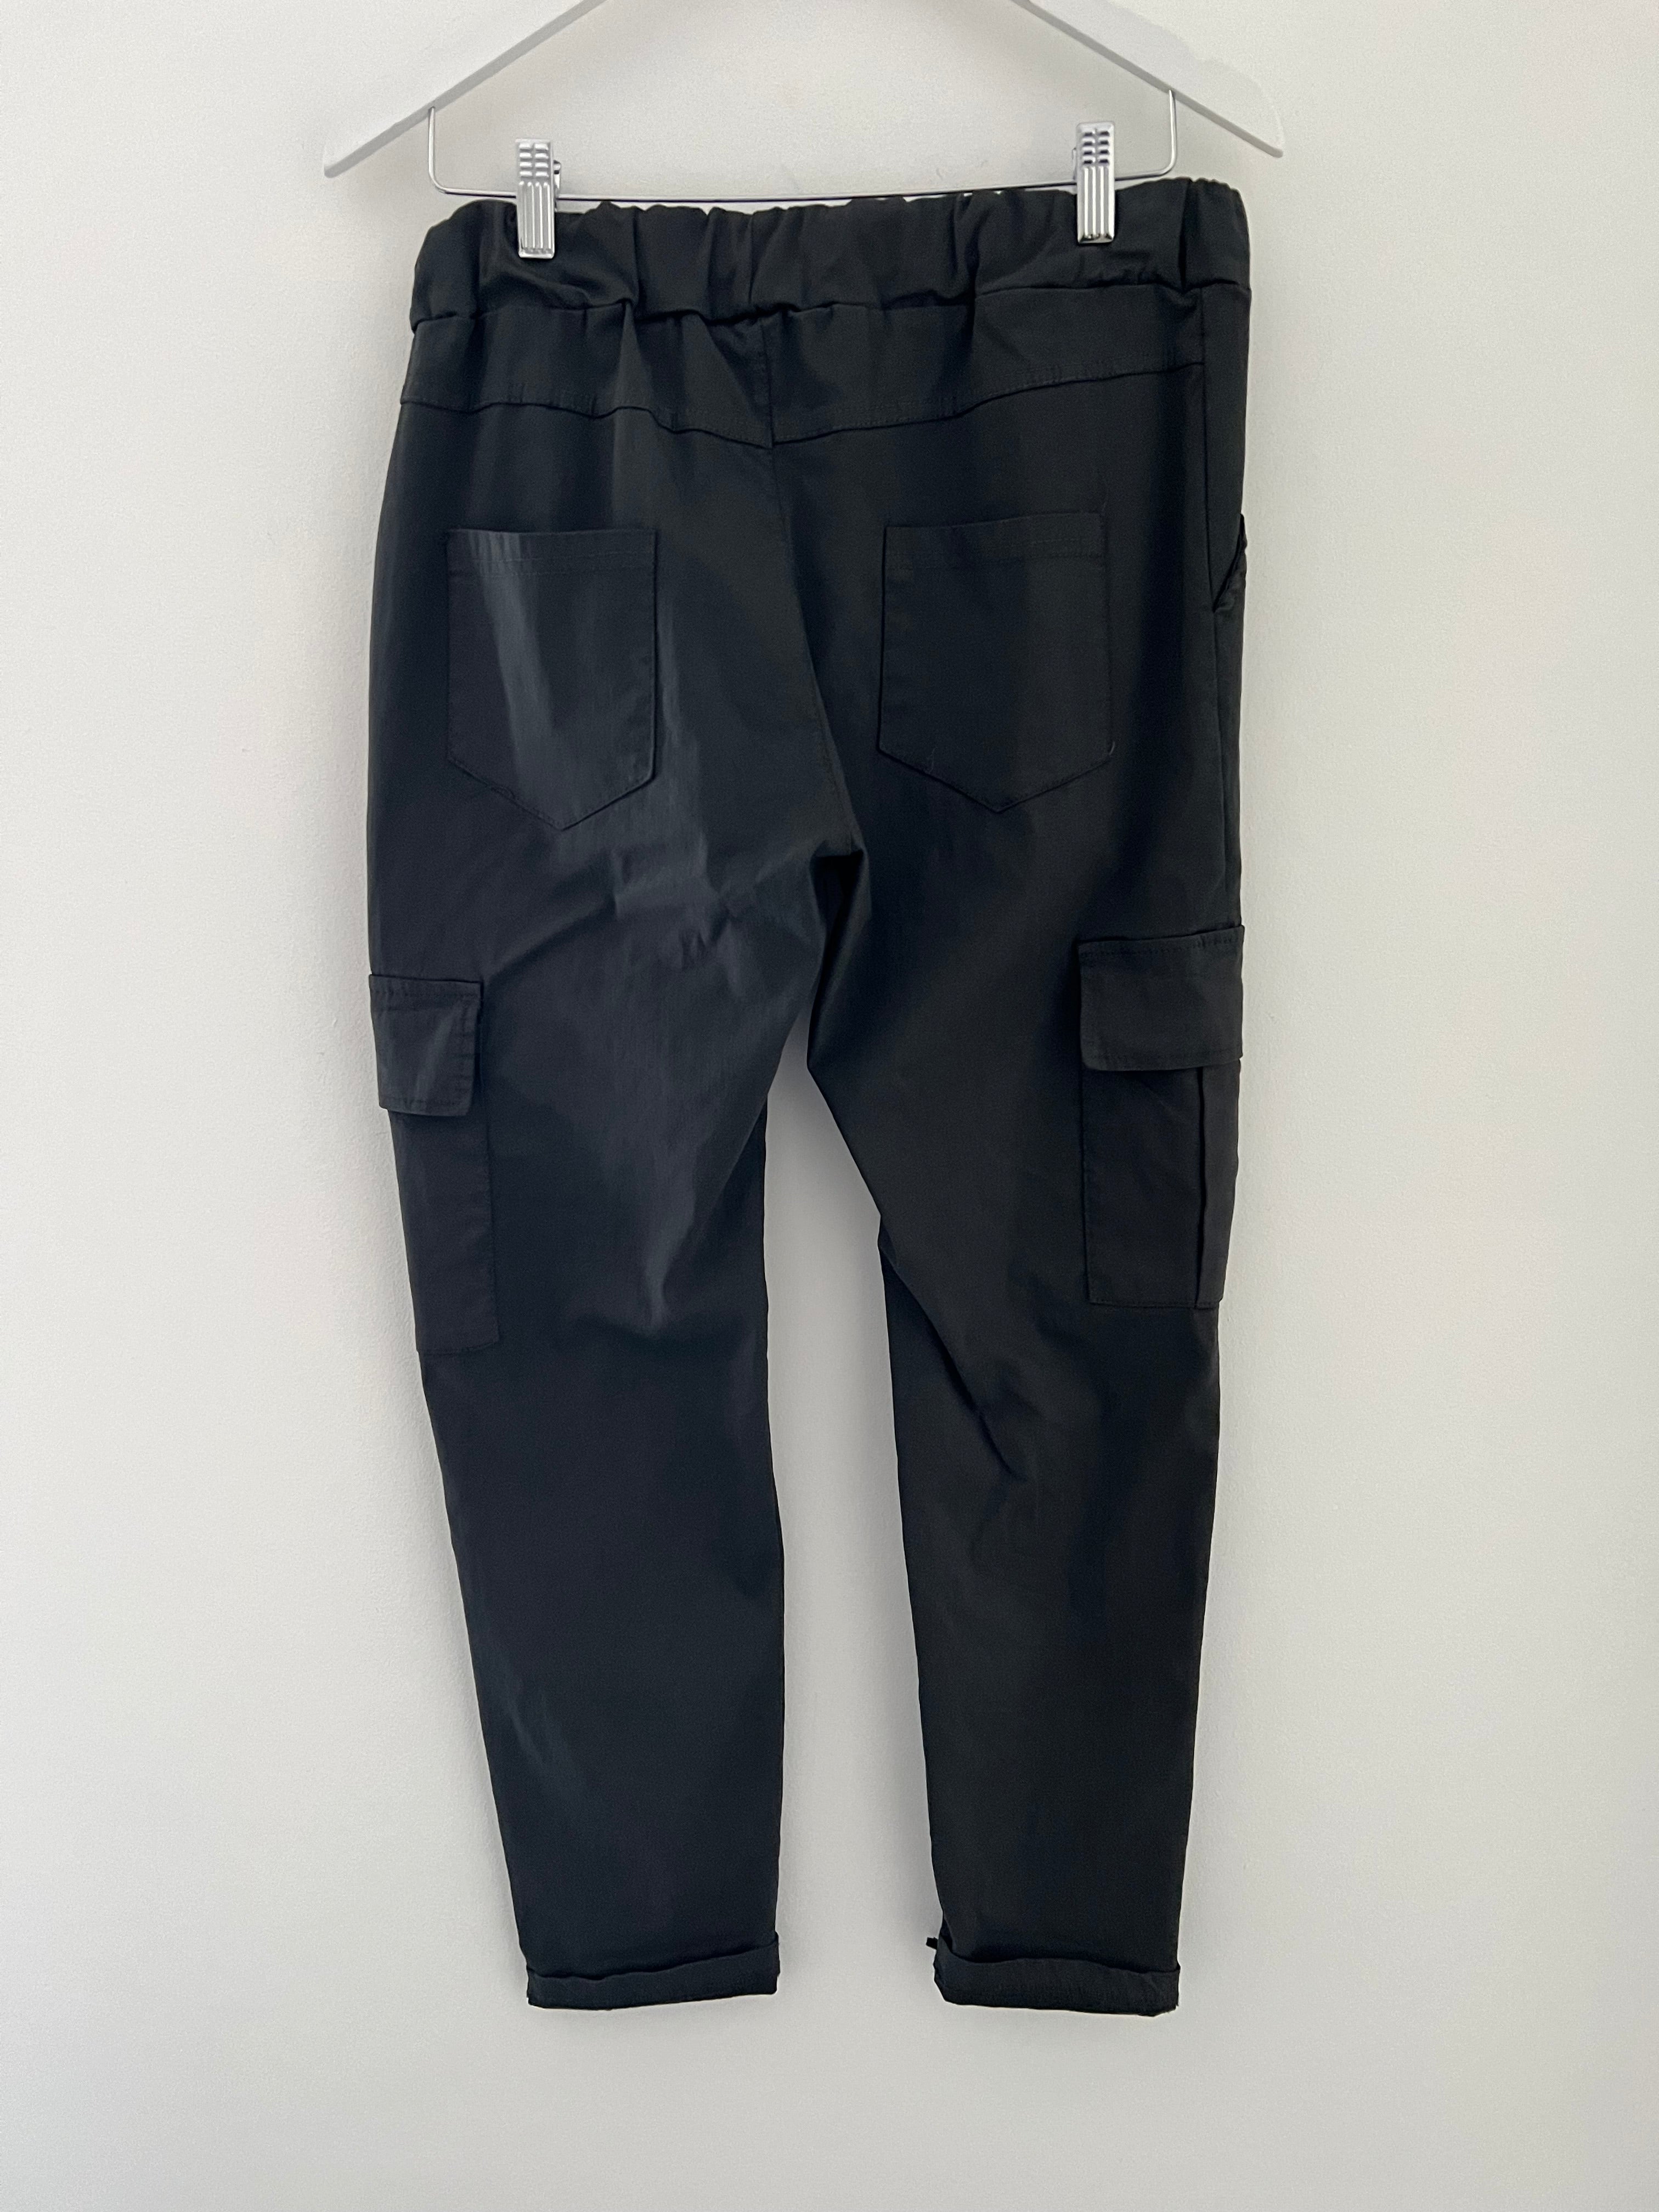 Super Stretch Cargo Four Pocket Joggers in Charcoal